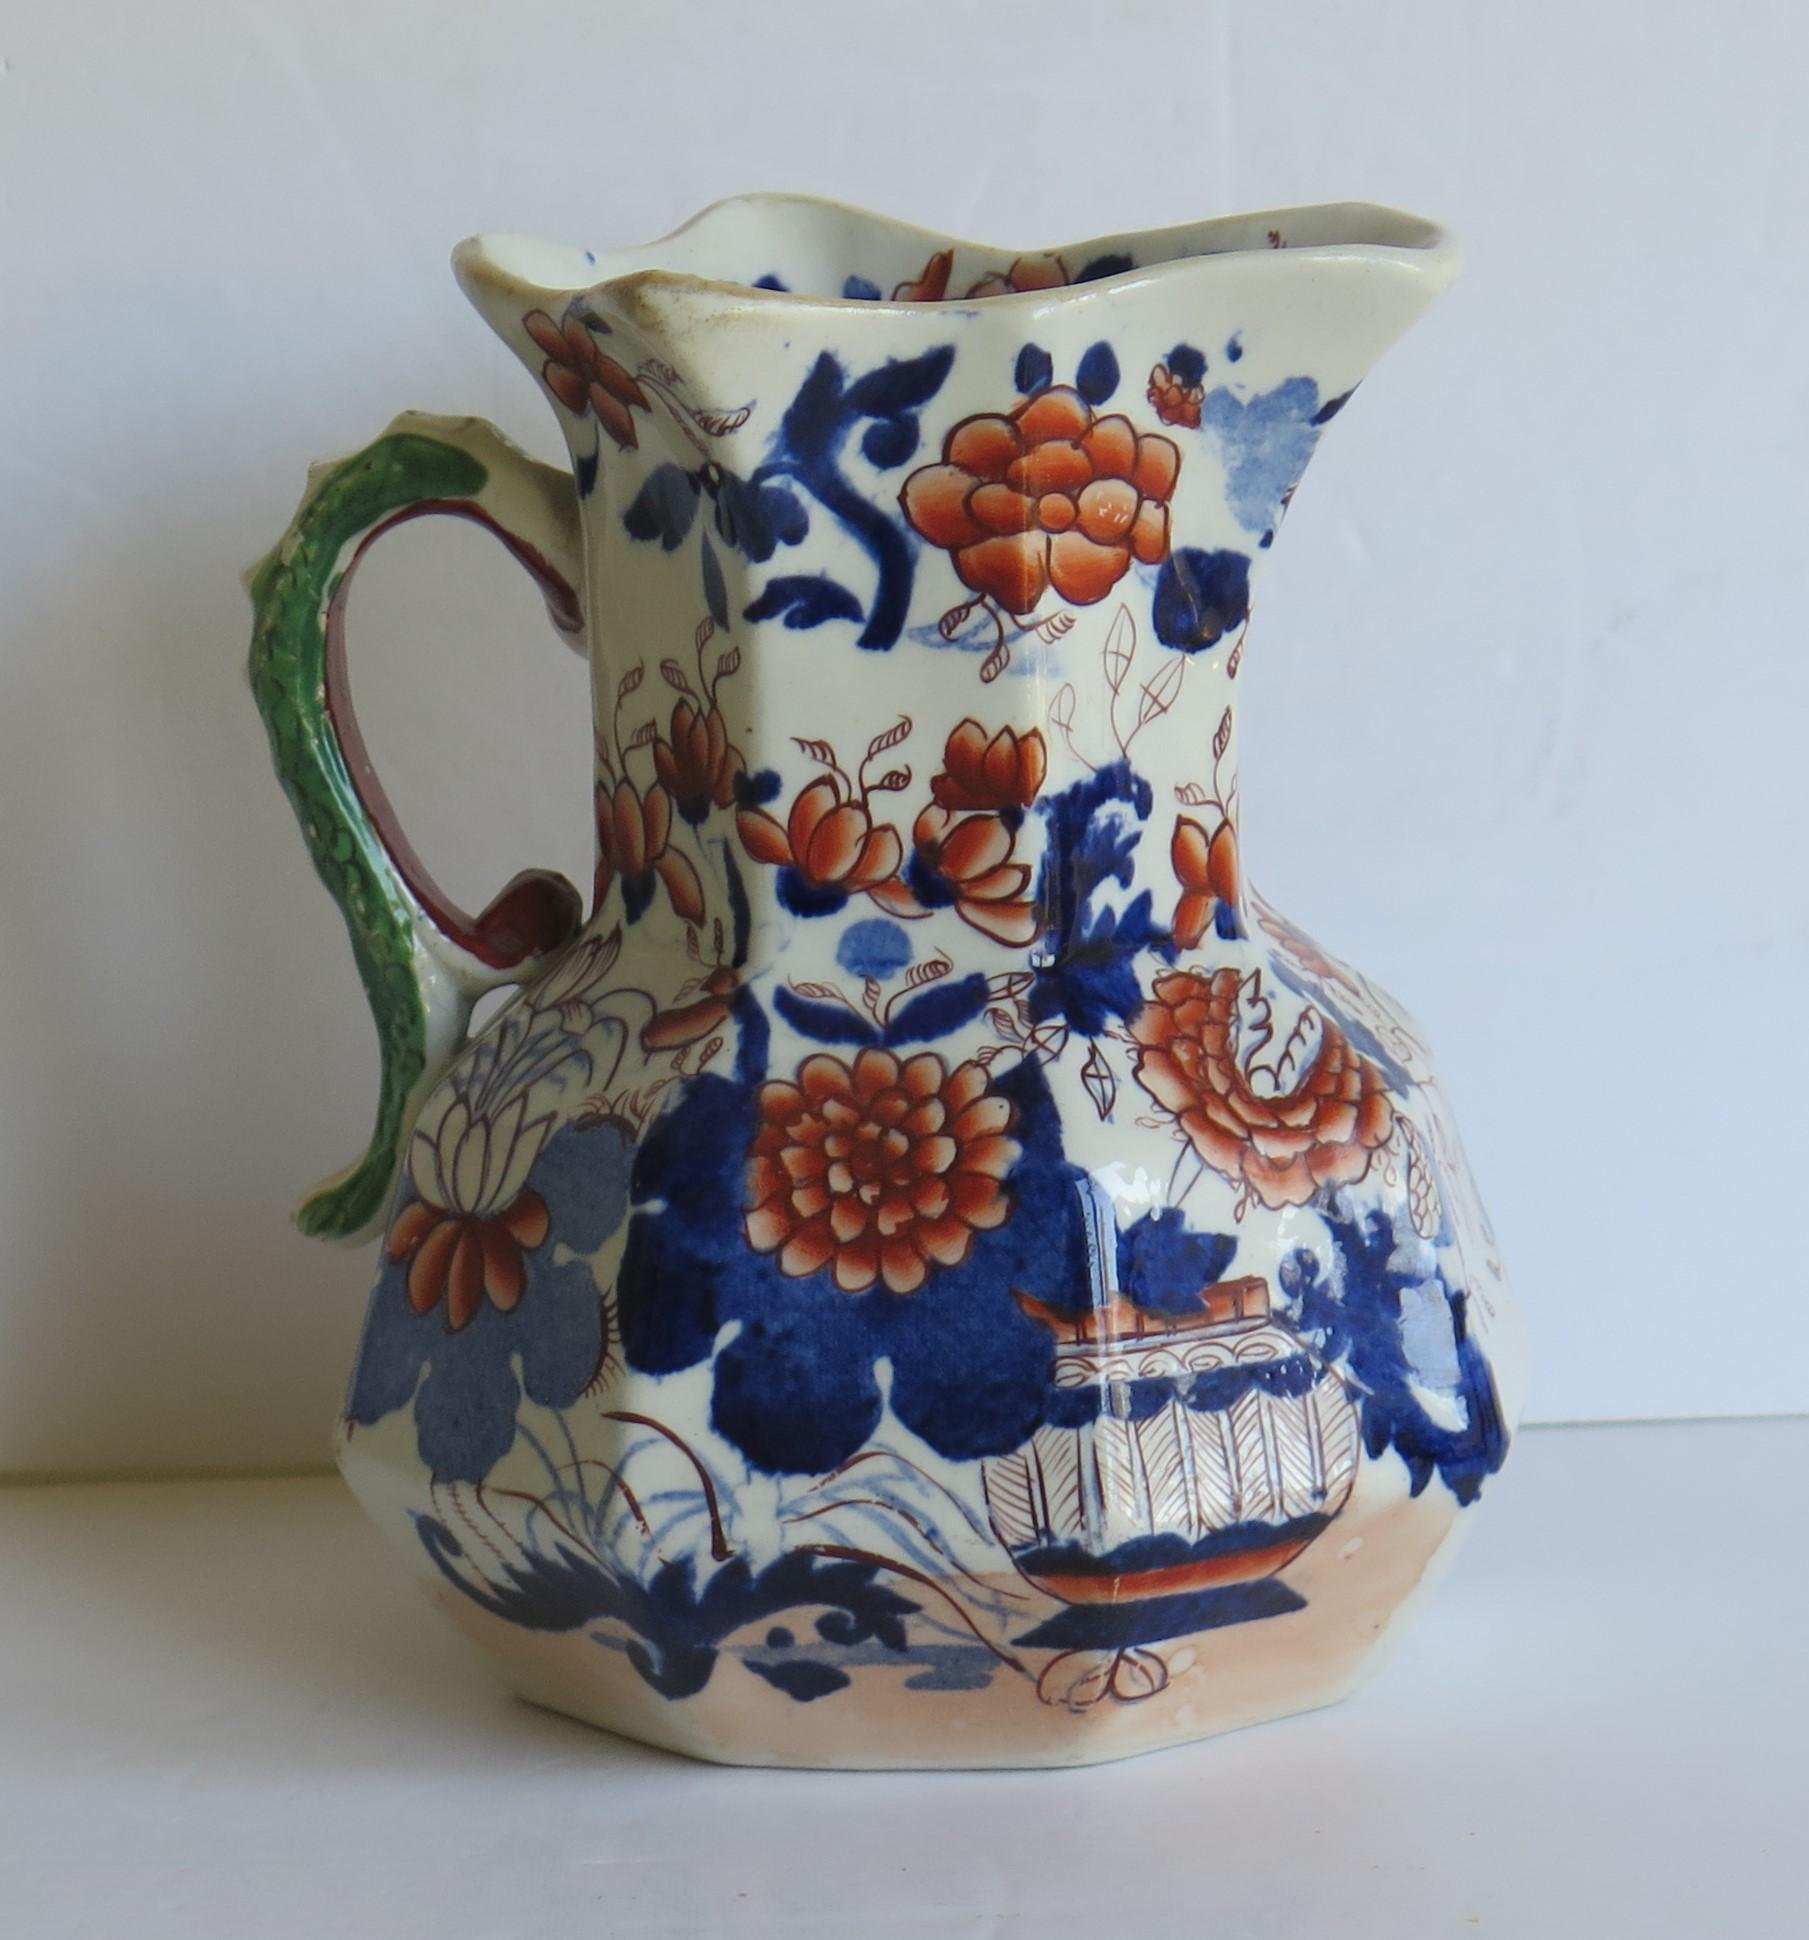 This is a good, early Mason's Ironstone Hydra jug or pitcher in the Basket Japan pattern, made in the English, late Georgian period, circa 1815-1820.

The jug has the octagonal 